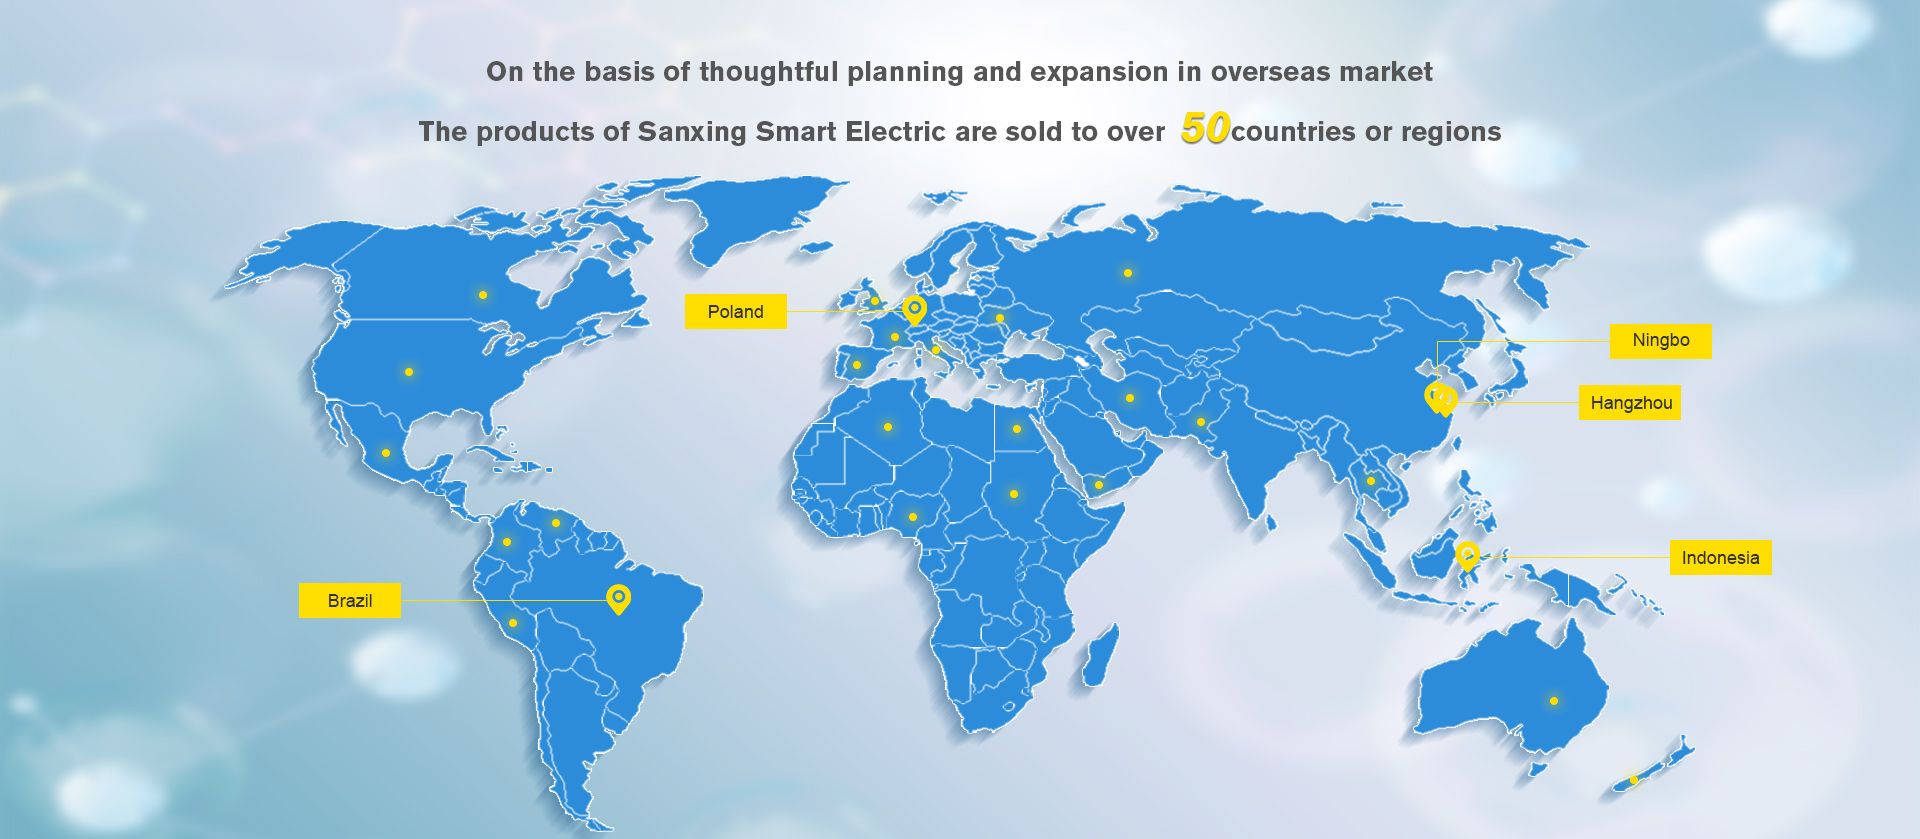 The products of Sanxing Smart Electric are sold to over 50 countries or regions